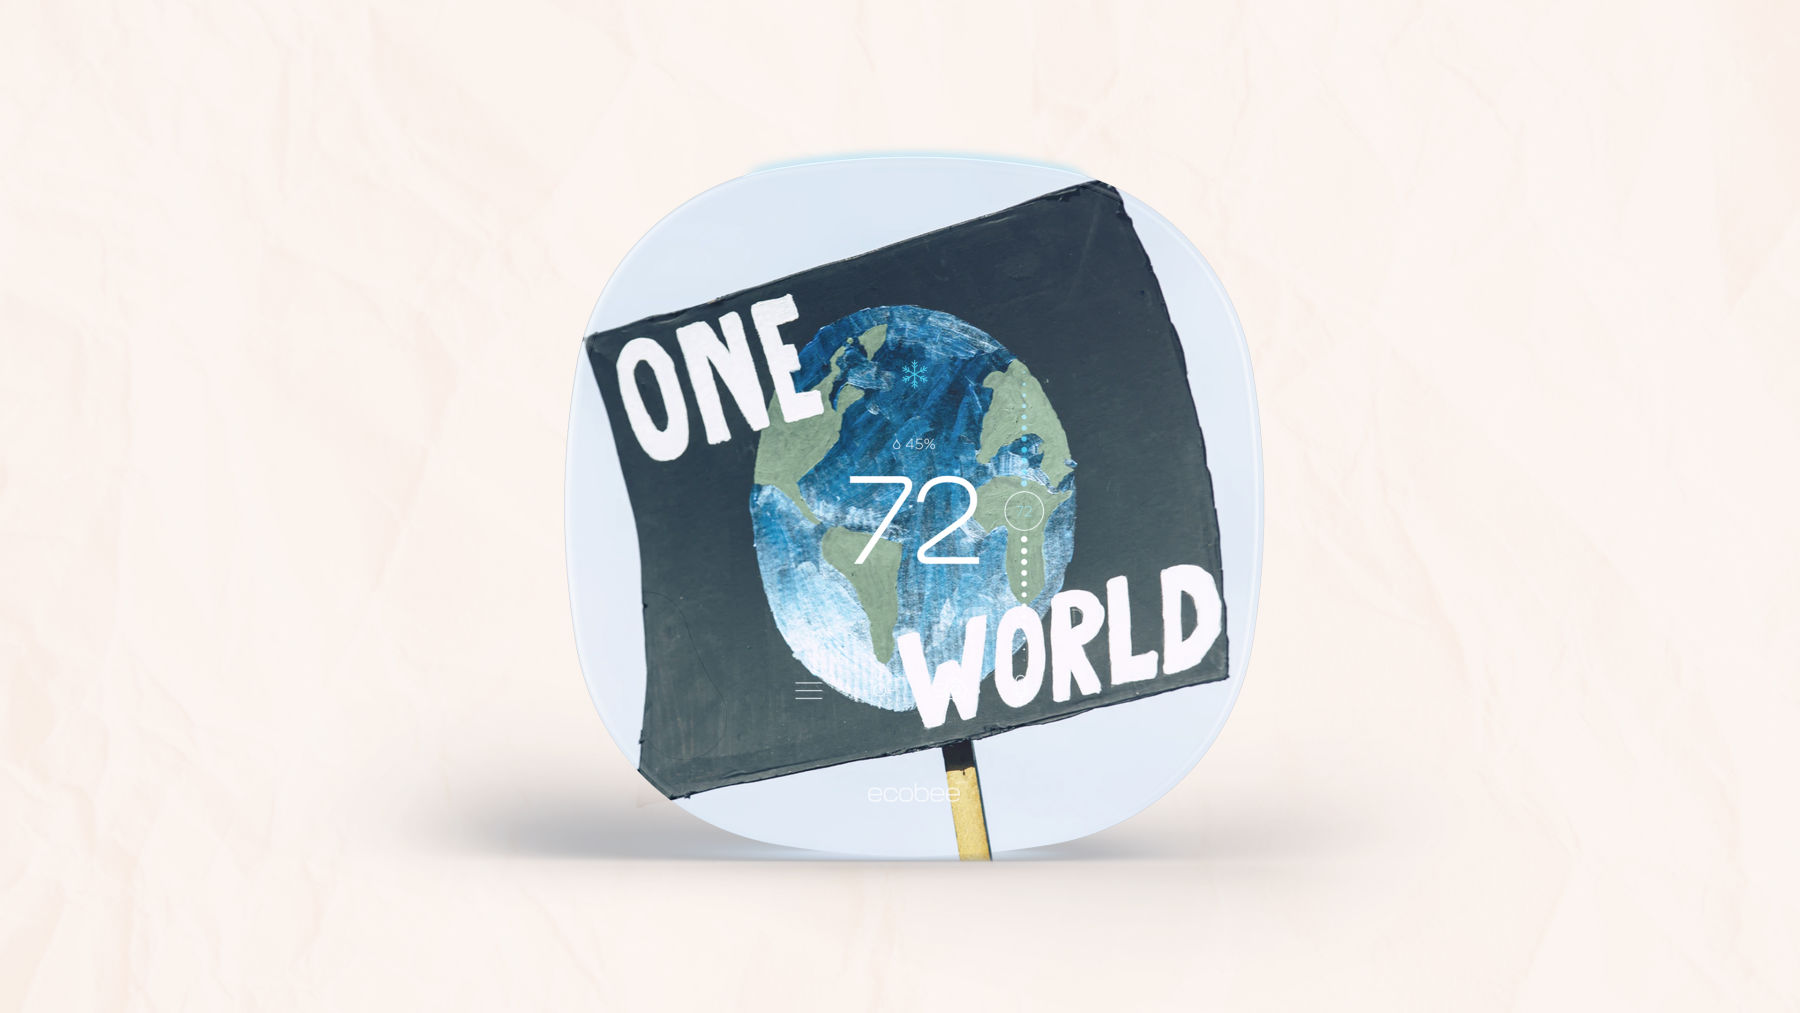 The ecobee squircle shape with a sign that says "One World" inside it.